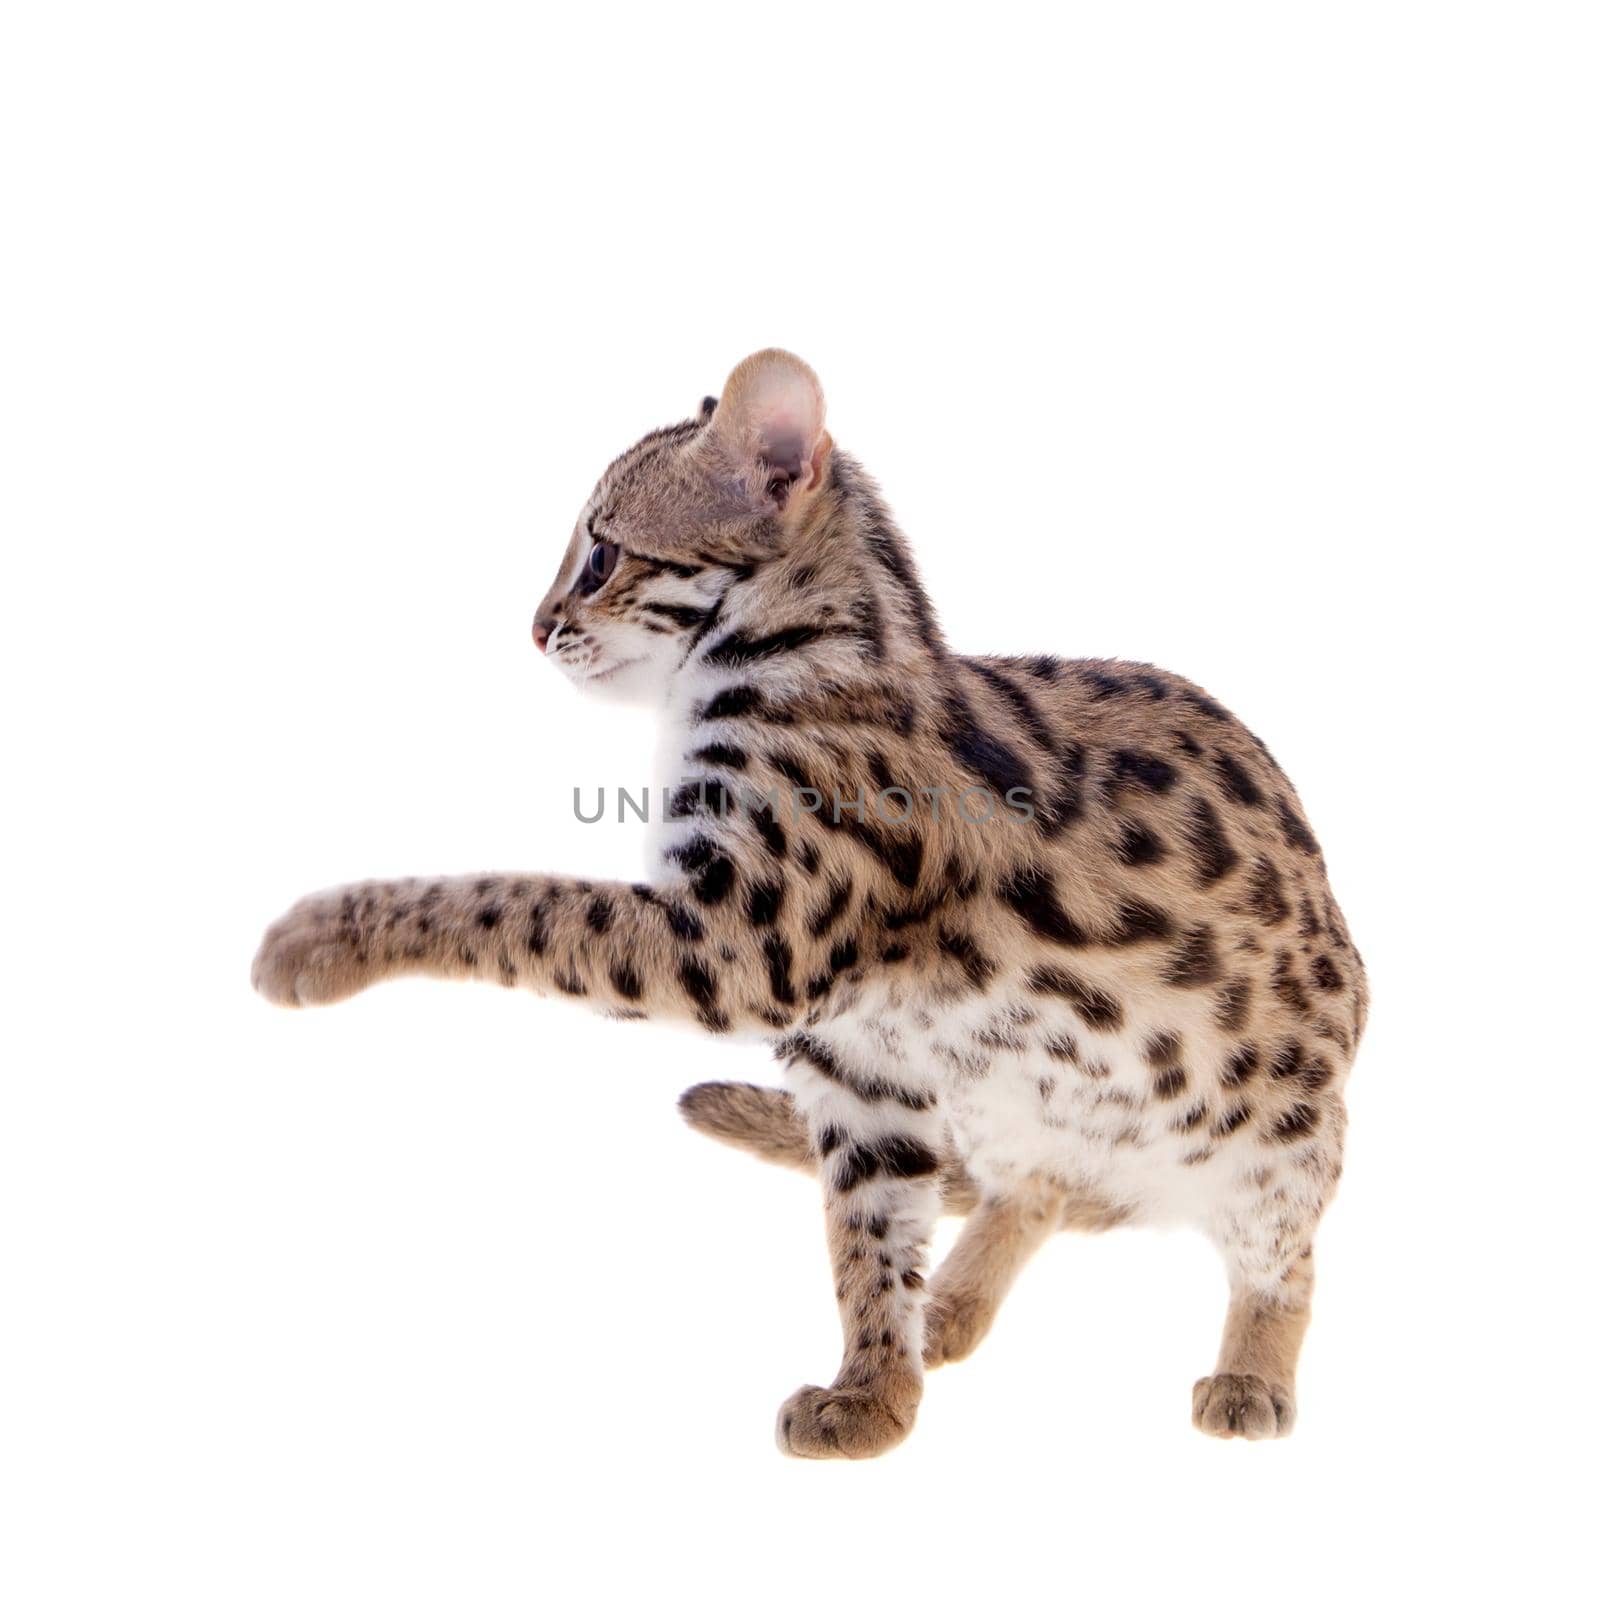 The asian leopard cat on white by RosaJay